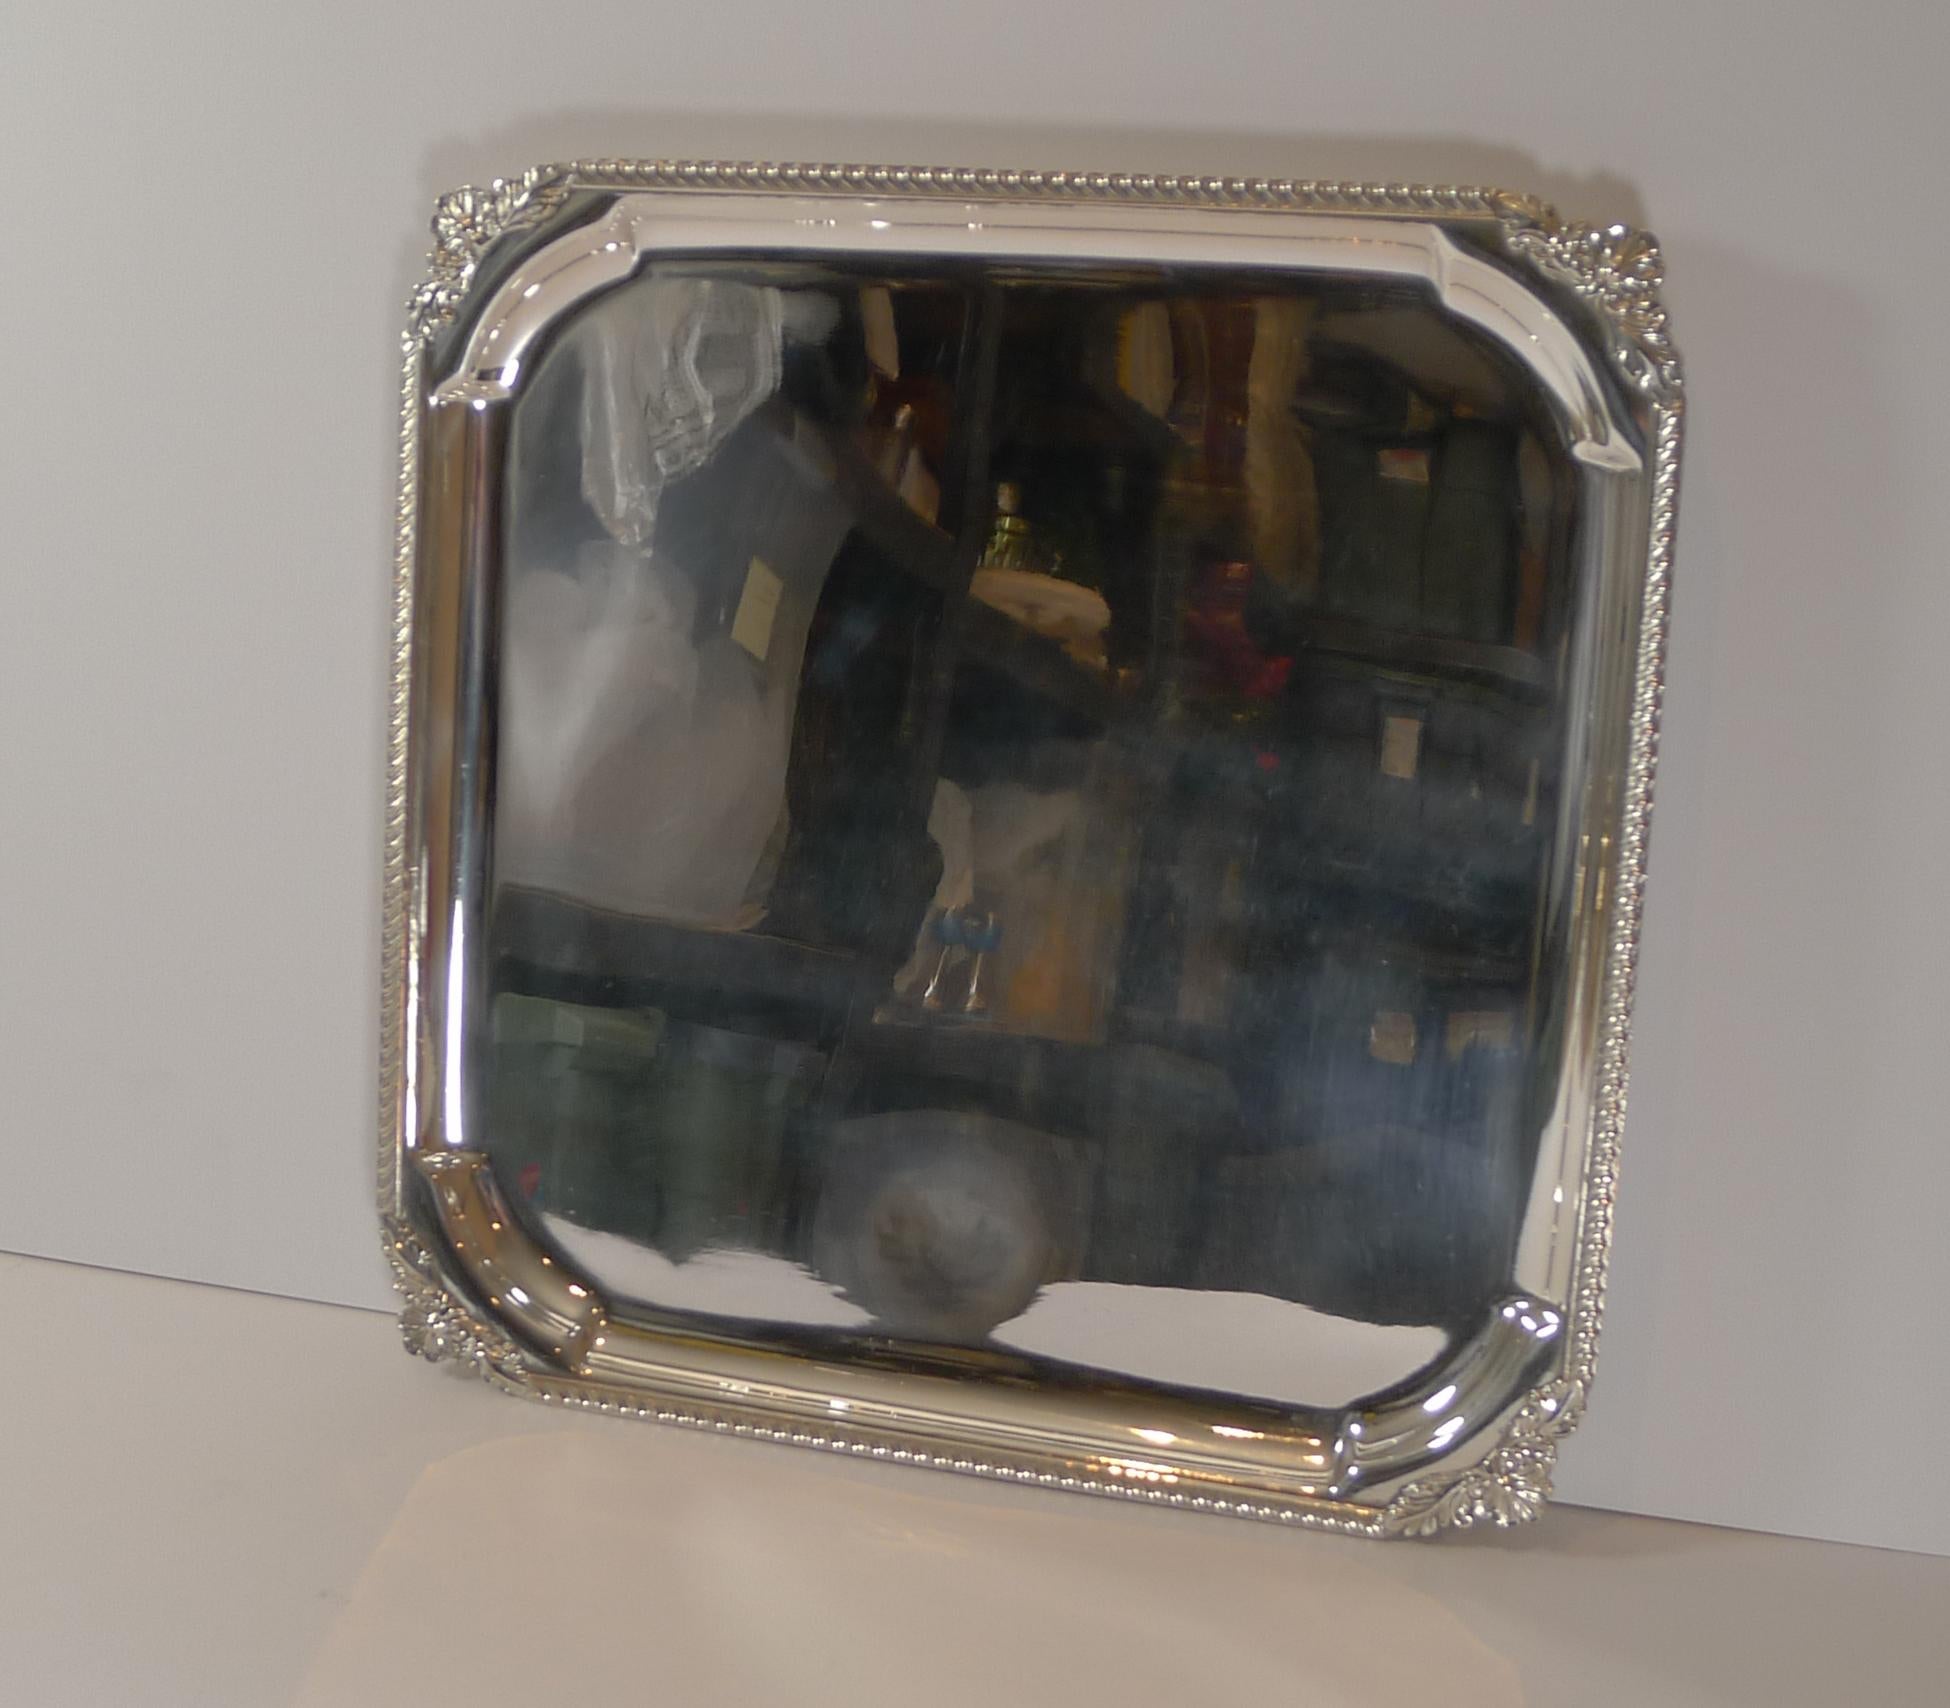 A fine English silver plated square tray or salver, perfect to serve drinks and a perfect bar accessory.

The underside is where the Pineapple mark can be found for Barker Ellis and dates to the Art Deco era, around 1930's. Always very